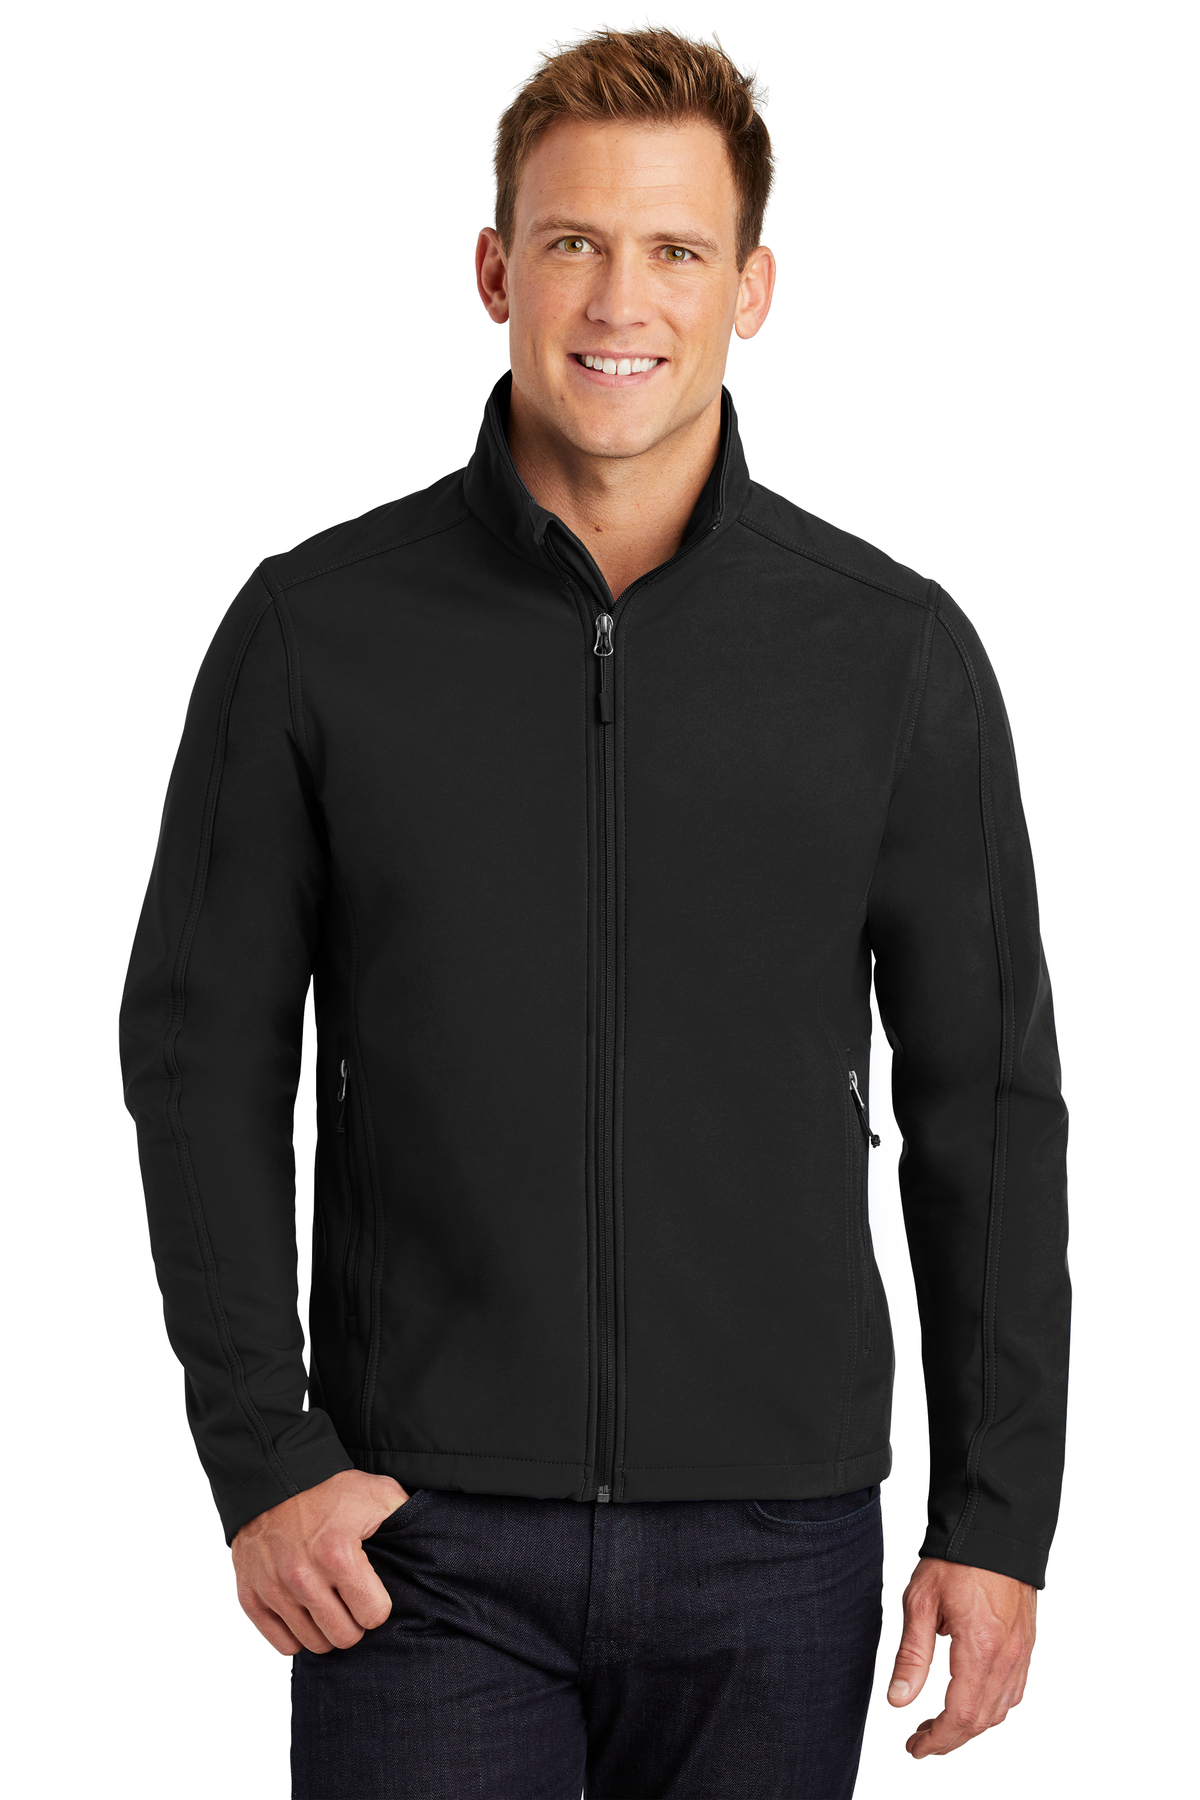 Port Authority Embroidered Men's Core Soft Shell Jacket | All Products ...